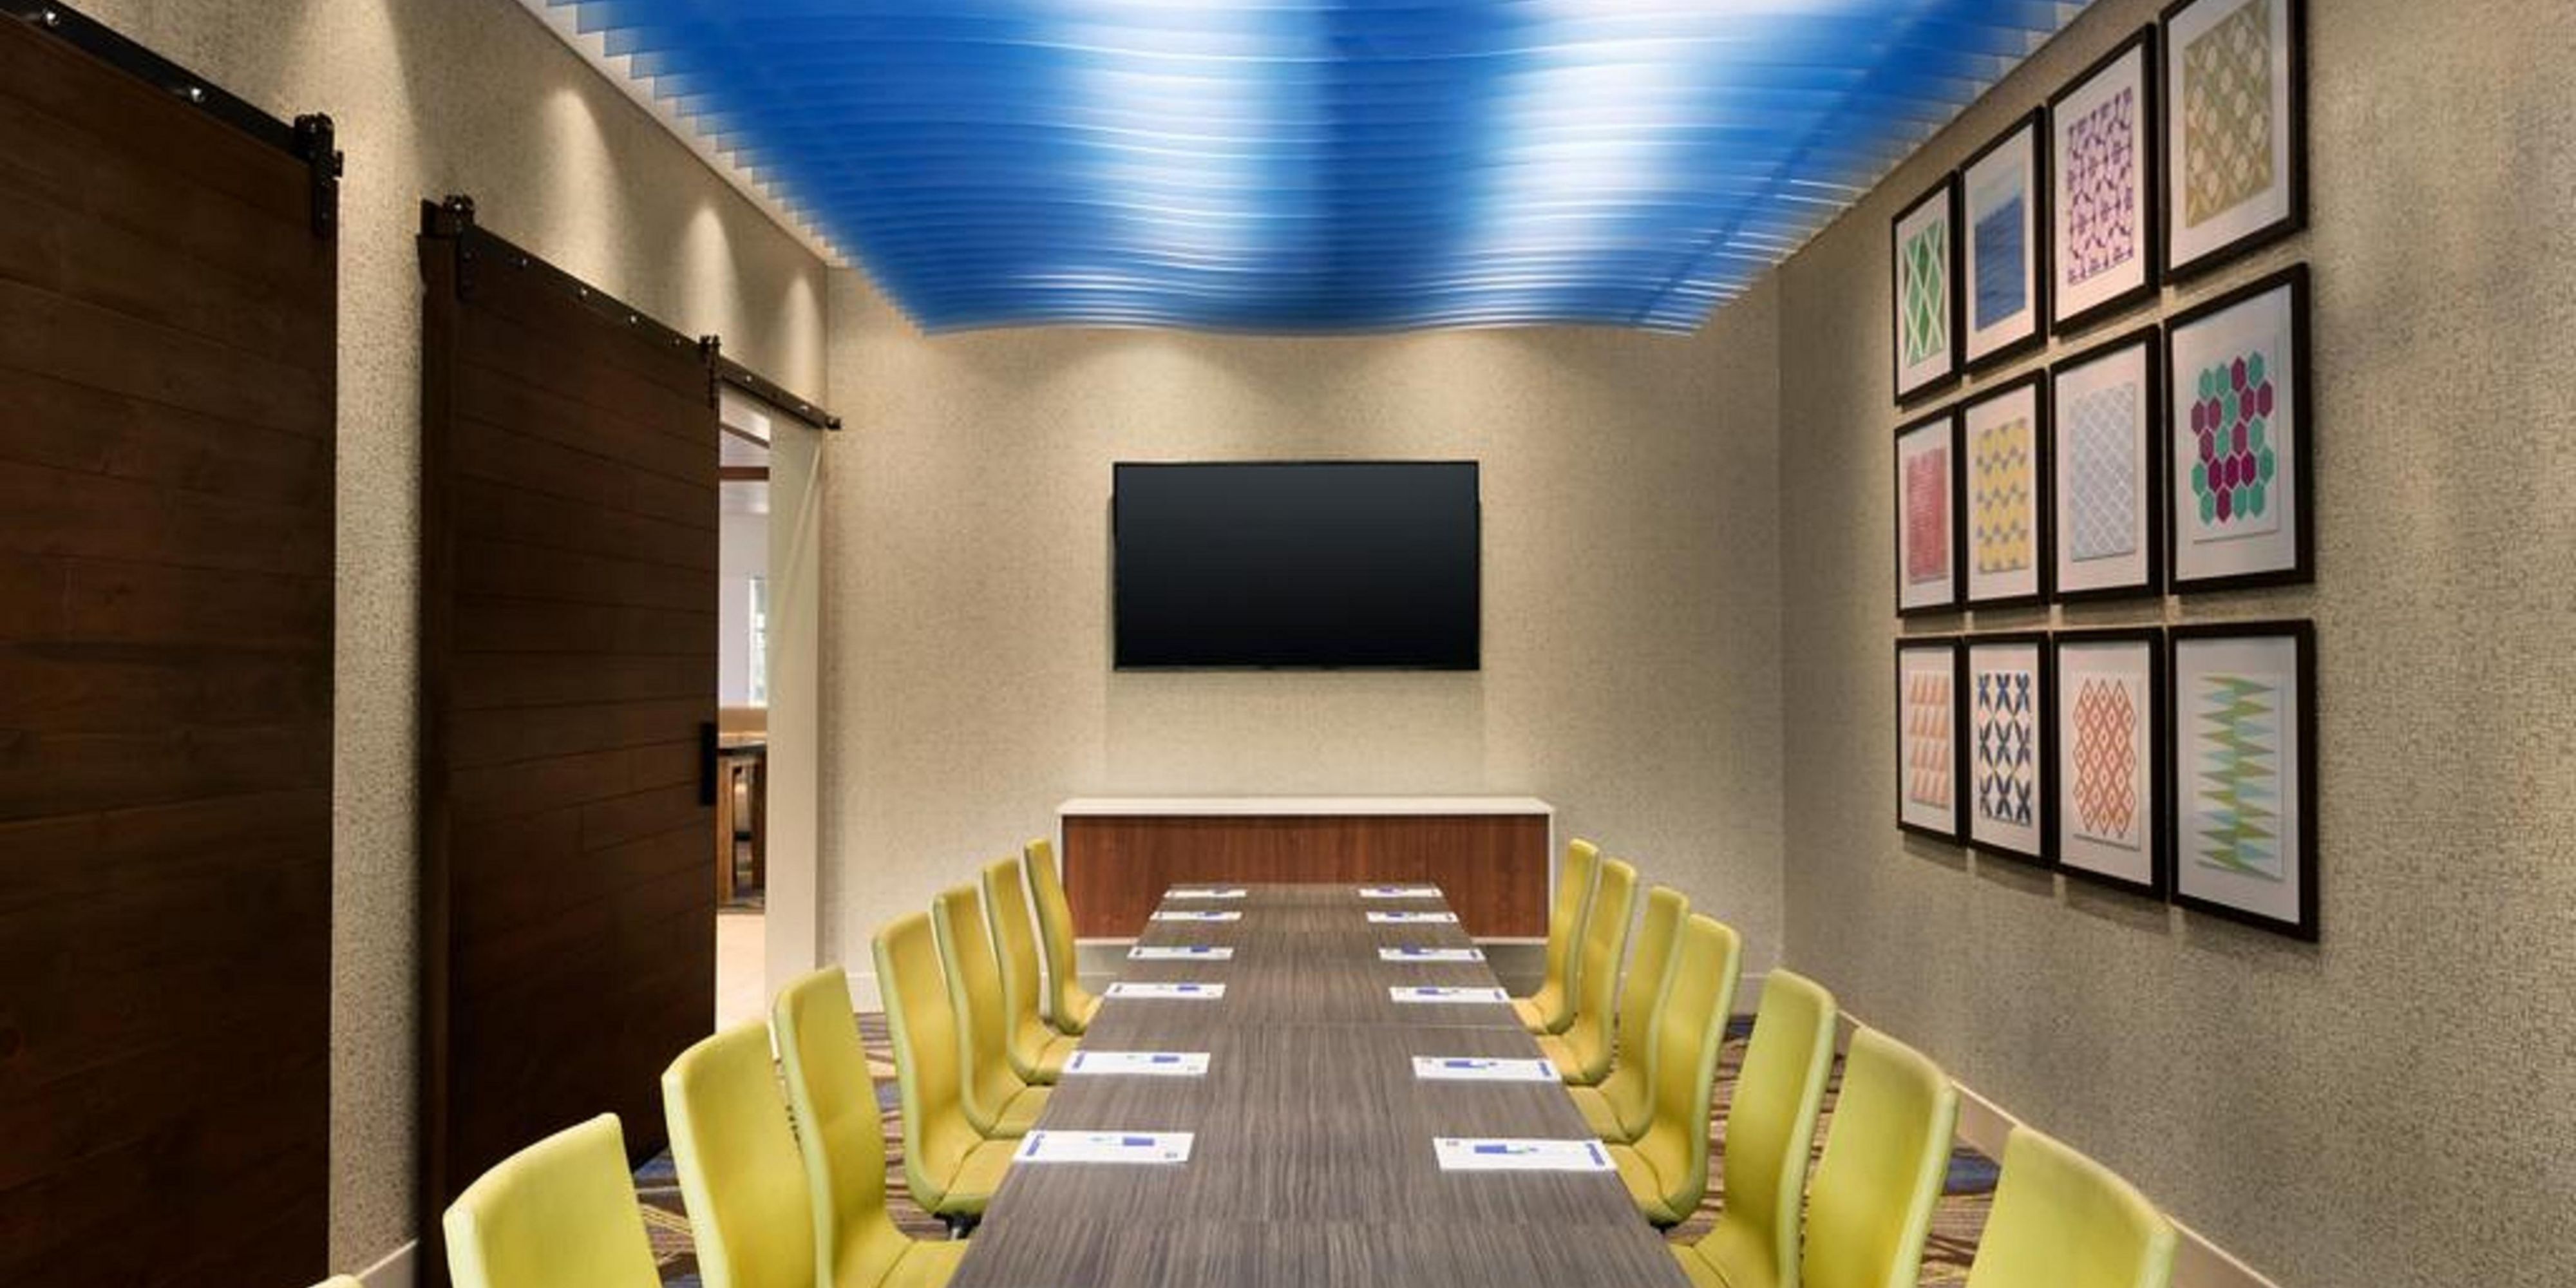 Looking for a place to hold a smaller meeting in downtown Milwaukee? We have a boardroom available at the Holiday Inn Express Downtown Milwaukee.